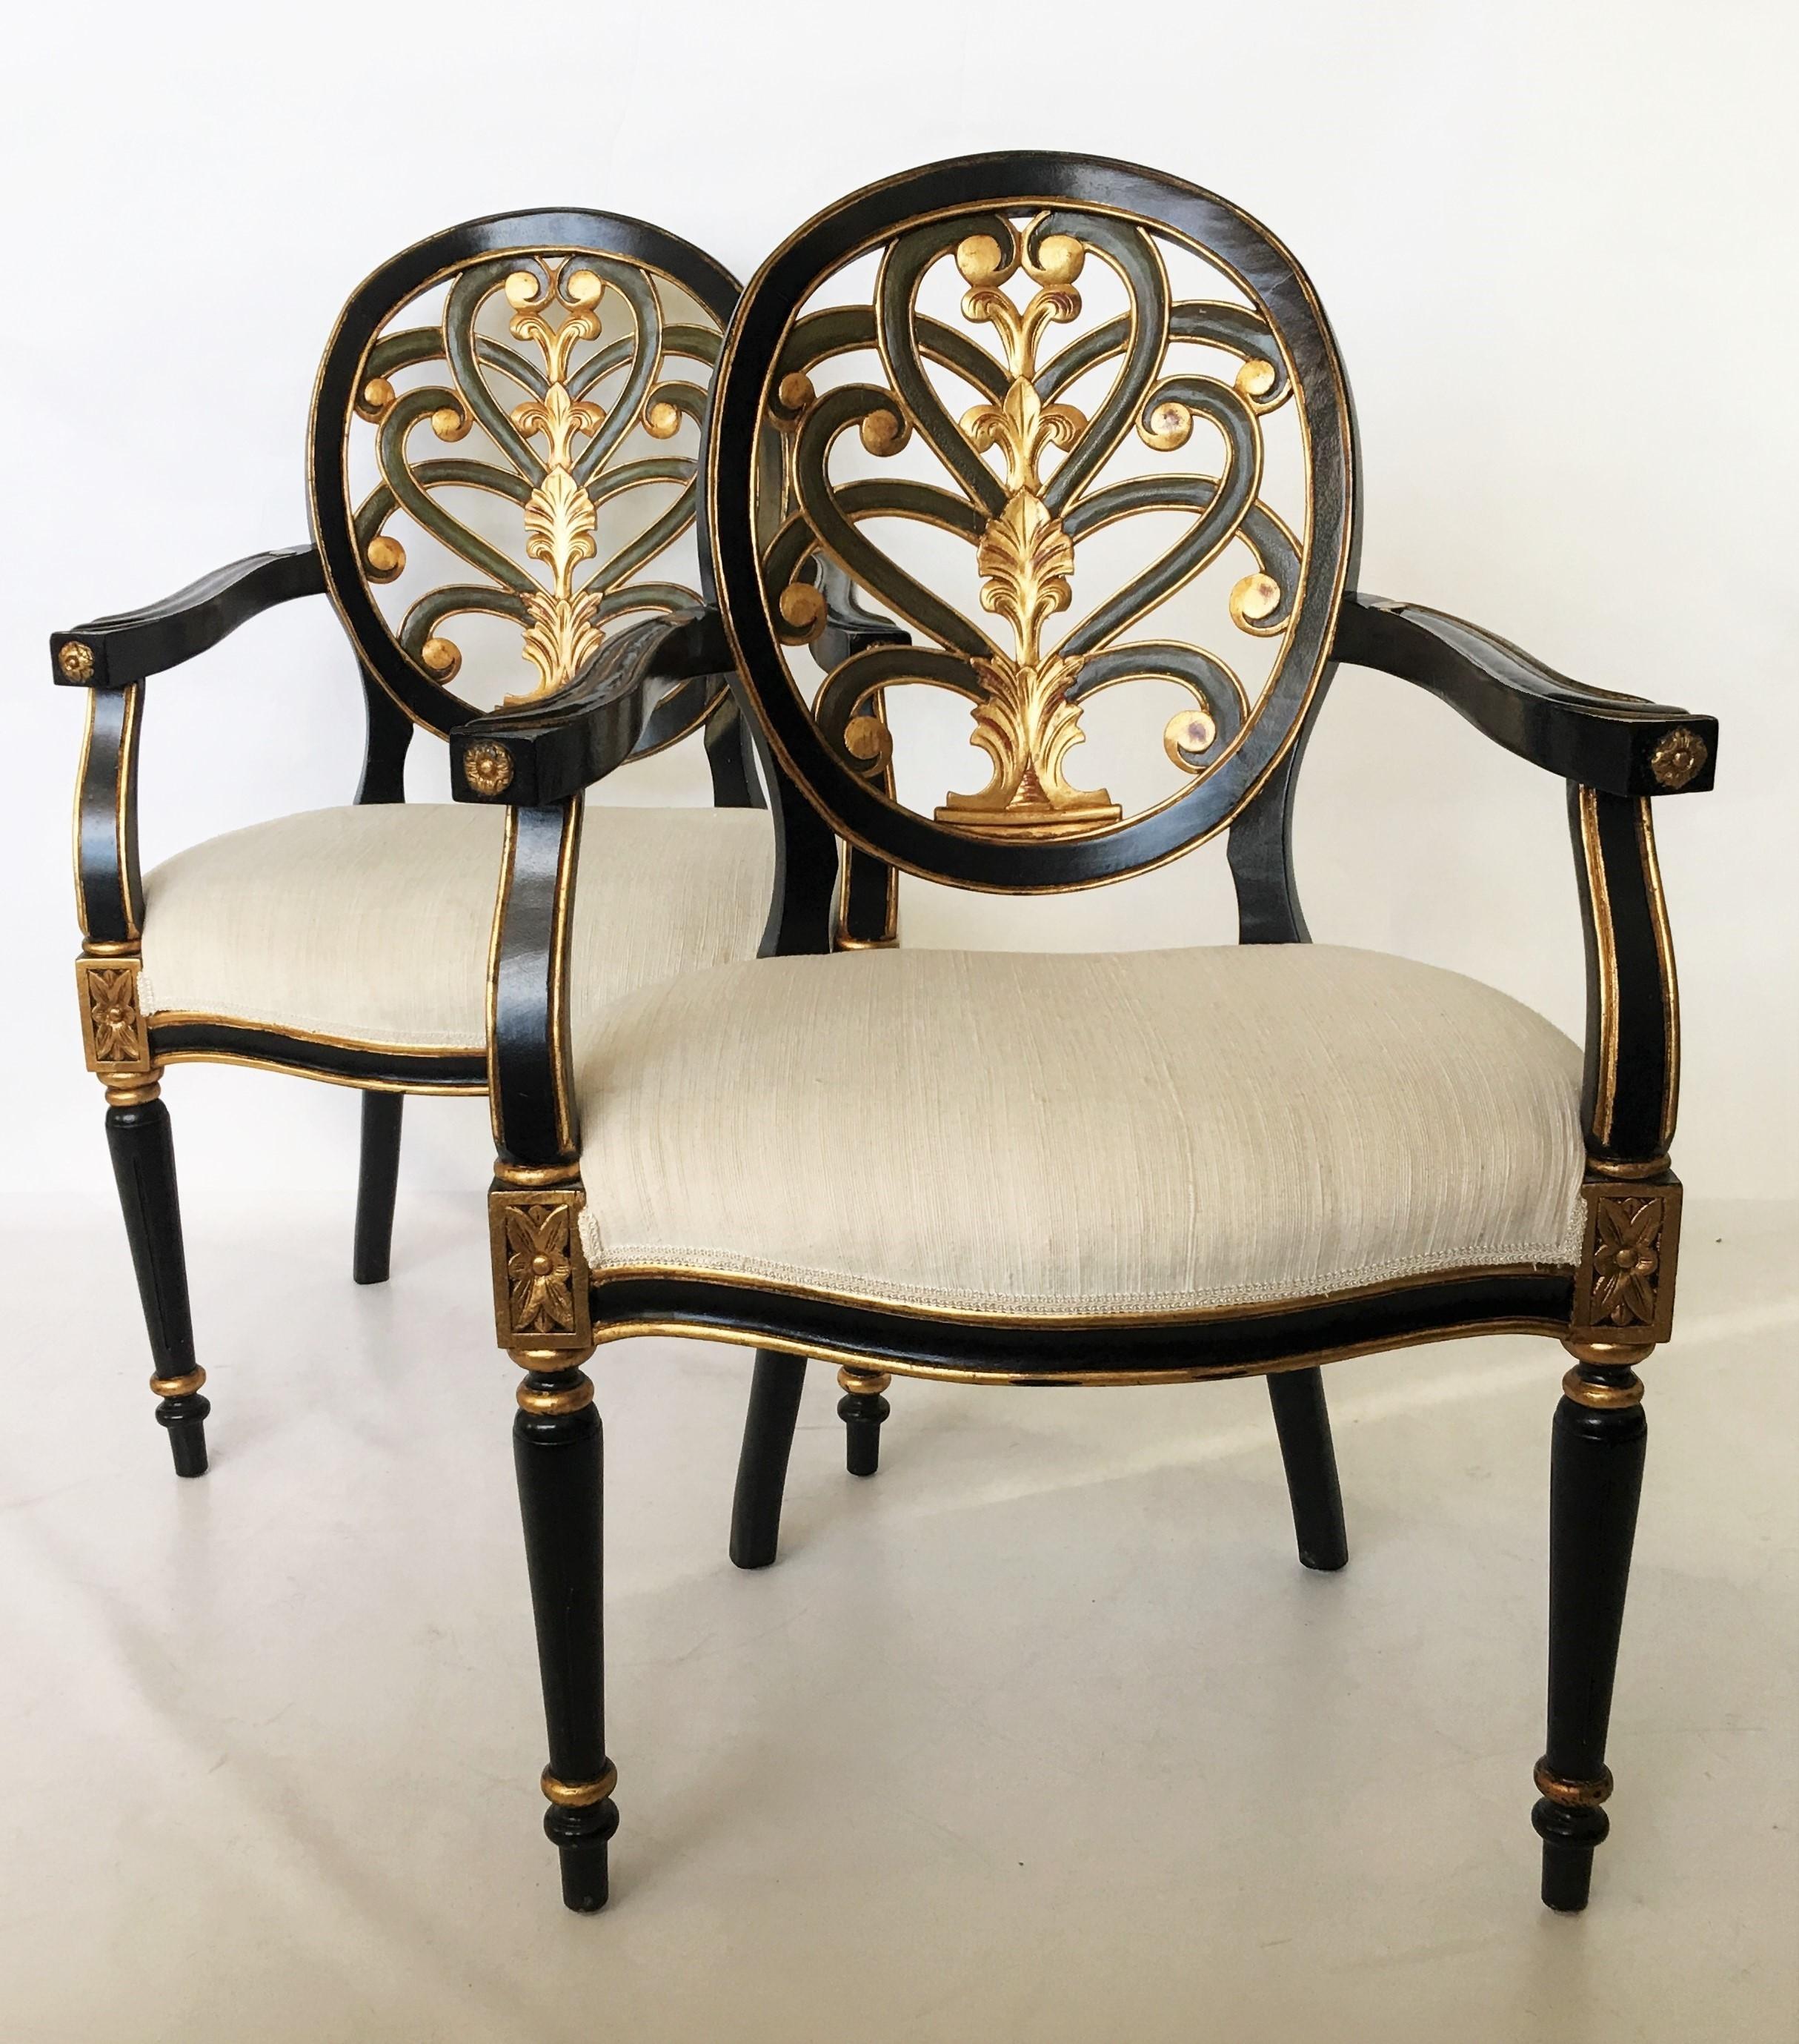 Superb pair of early 20th century Regency style armchairs in the neoclassical design. Ebonized chairs with an open carved oval back-splat with green and gold leaf accents. The seats are upholstered in a cream colored fabric at present but this could